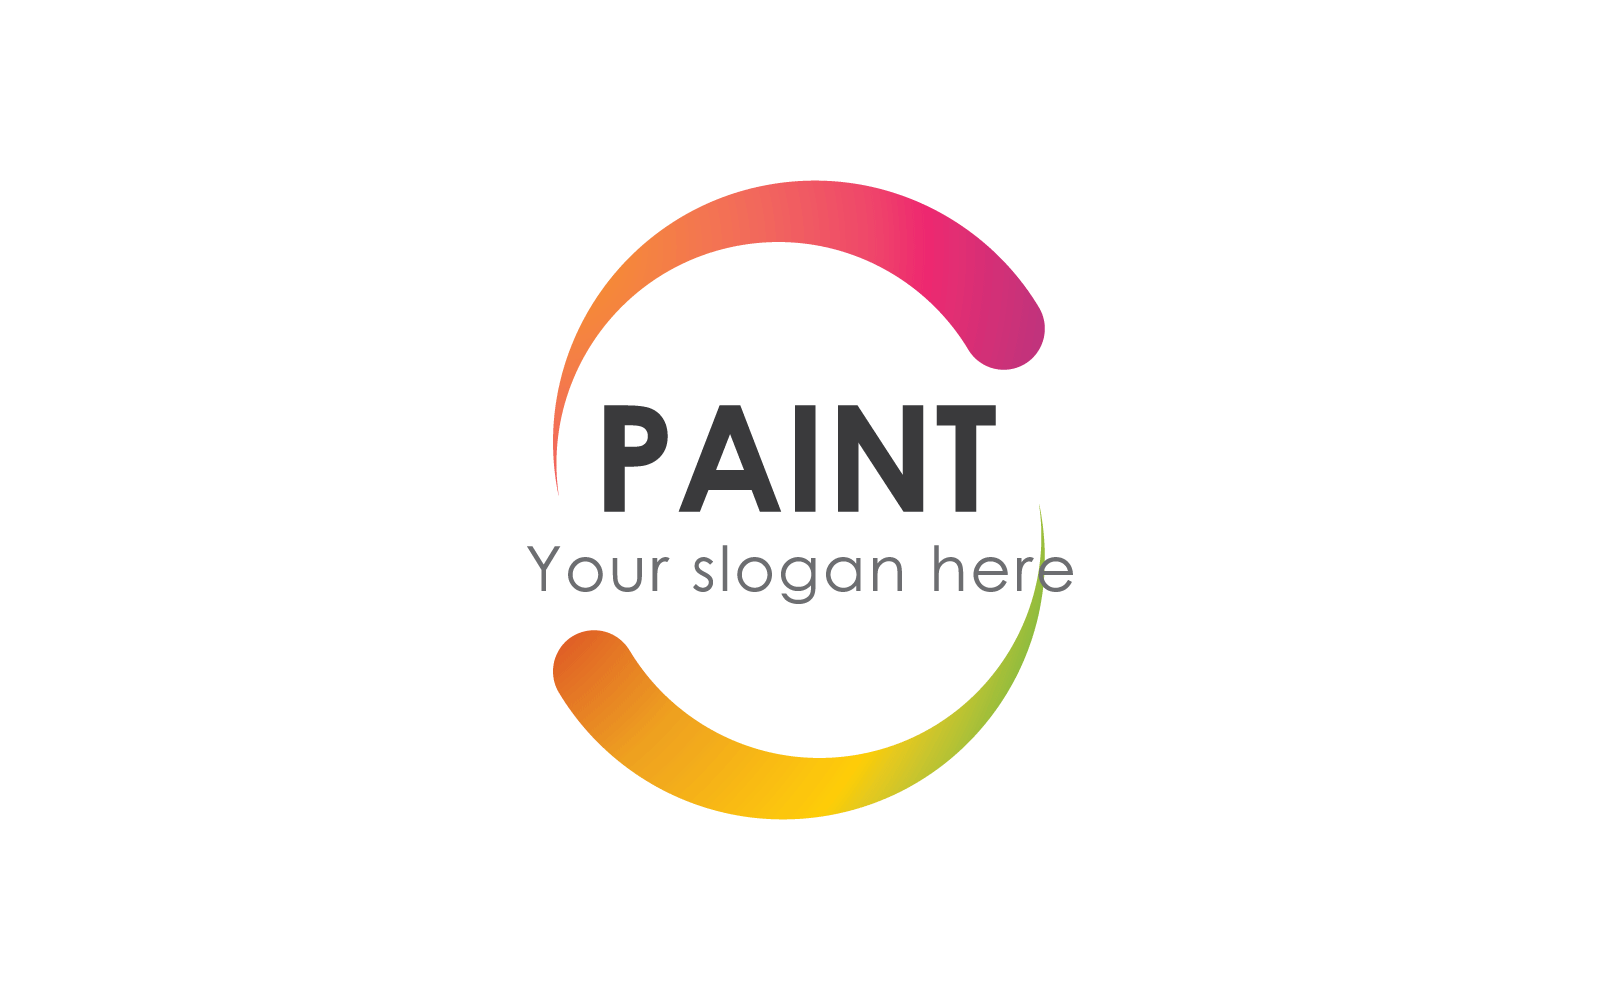 Paint House design logo icon business vector template